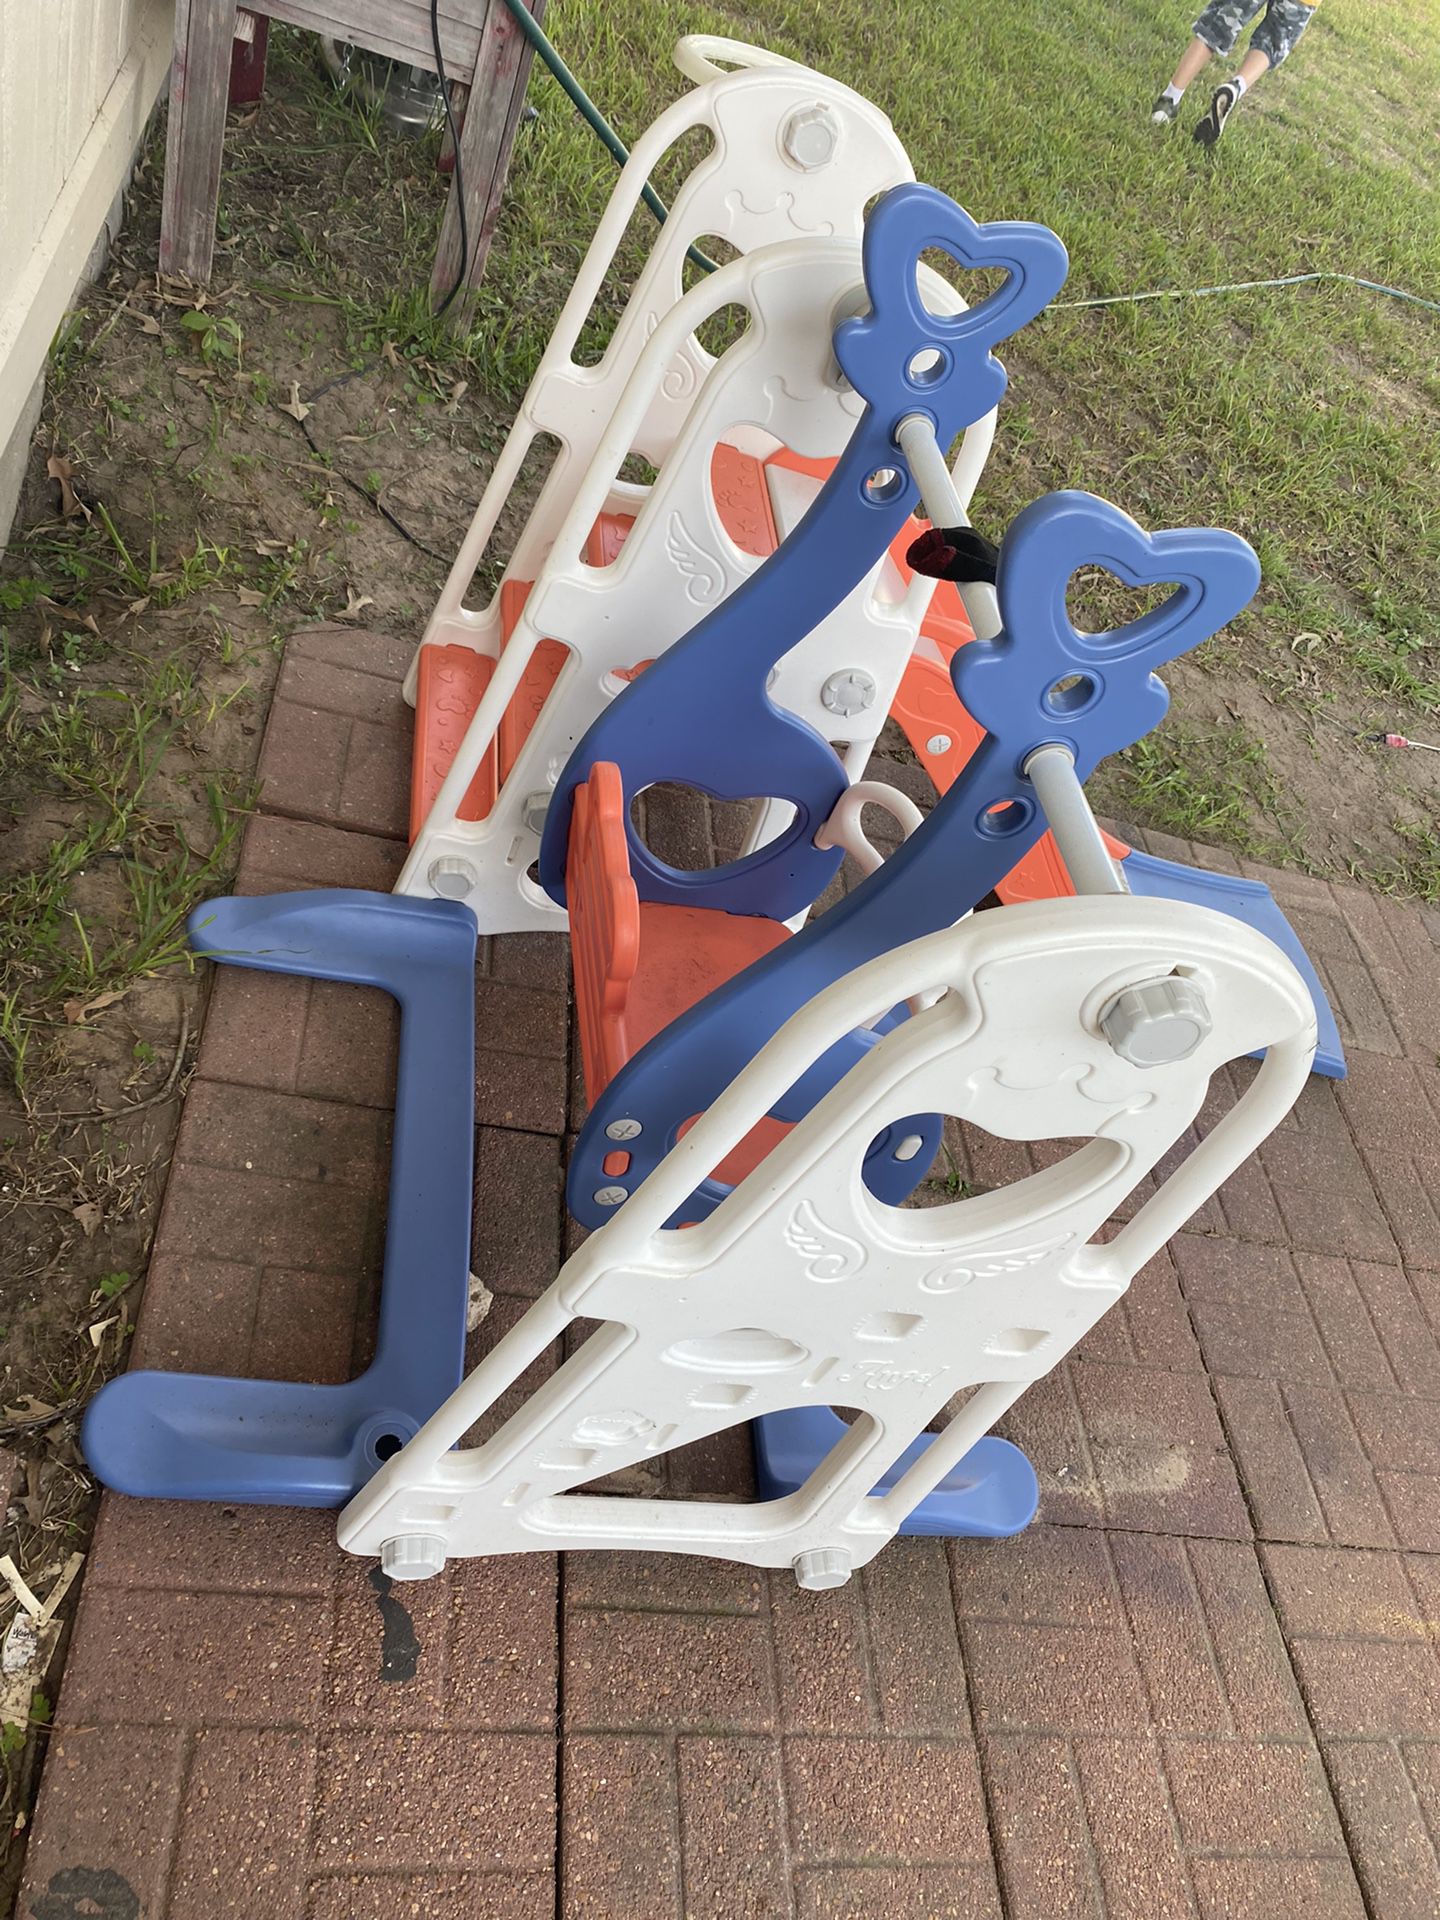 Toddler swing and slide